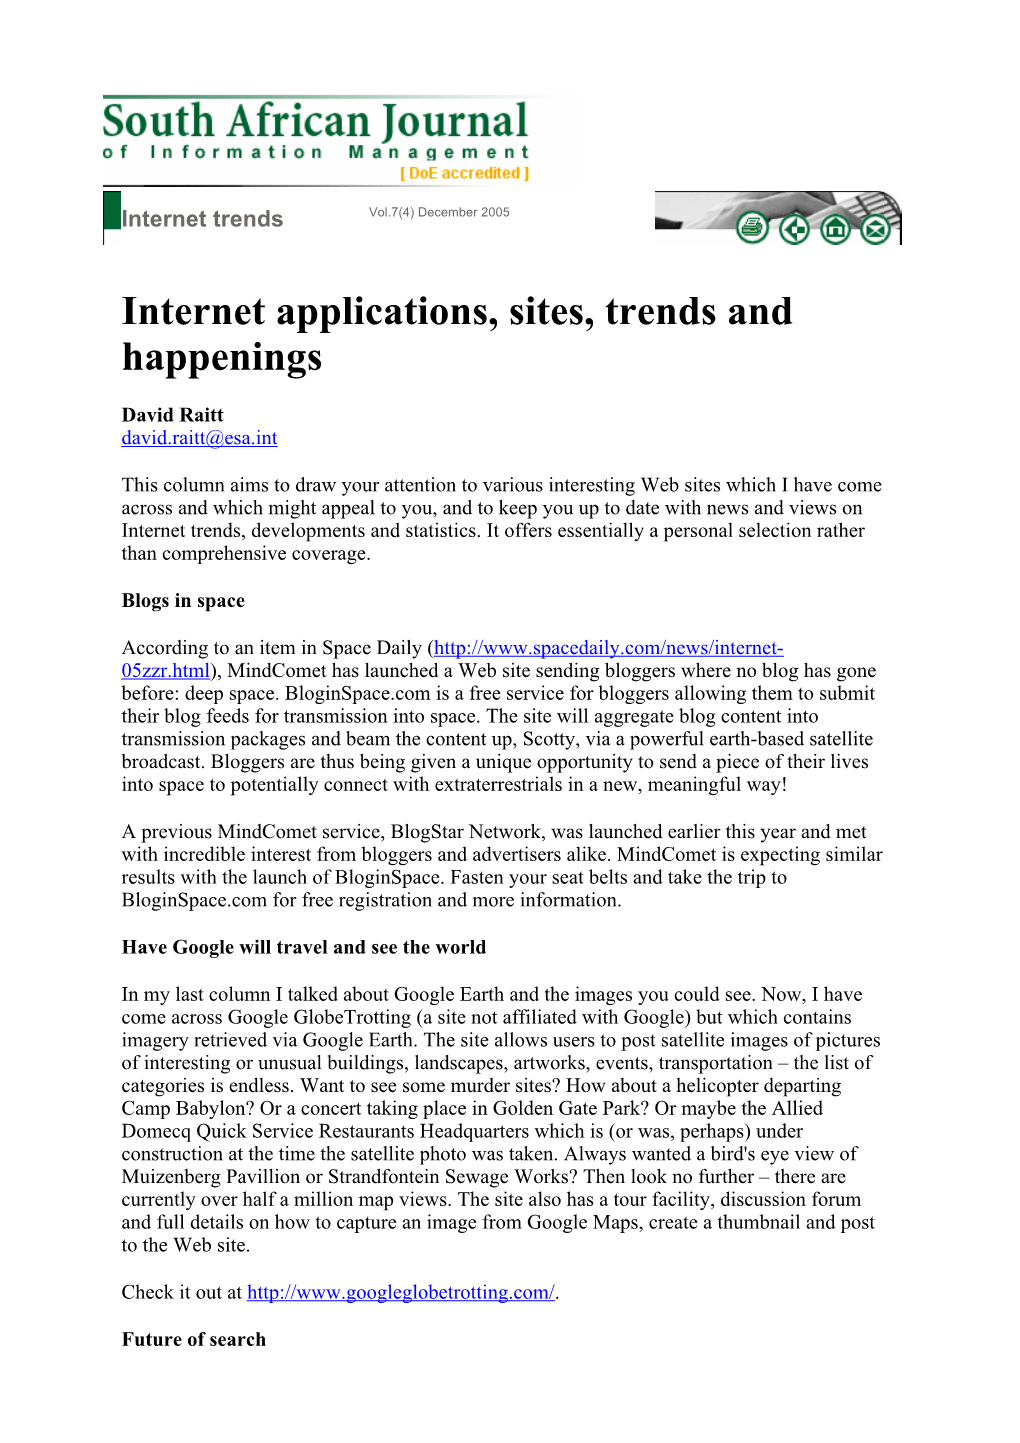 Internet Applications, Sites, Trends and Happenings